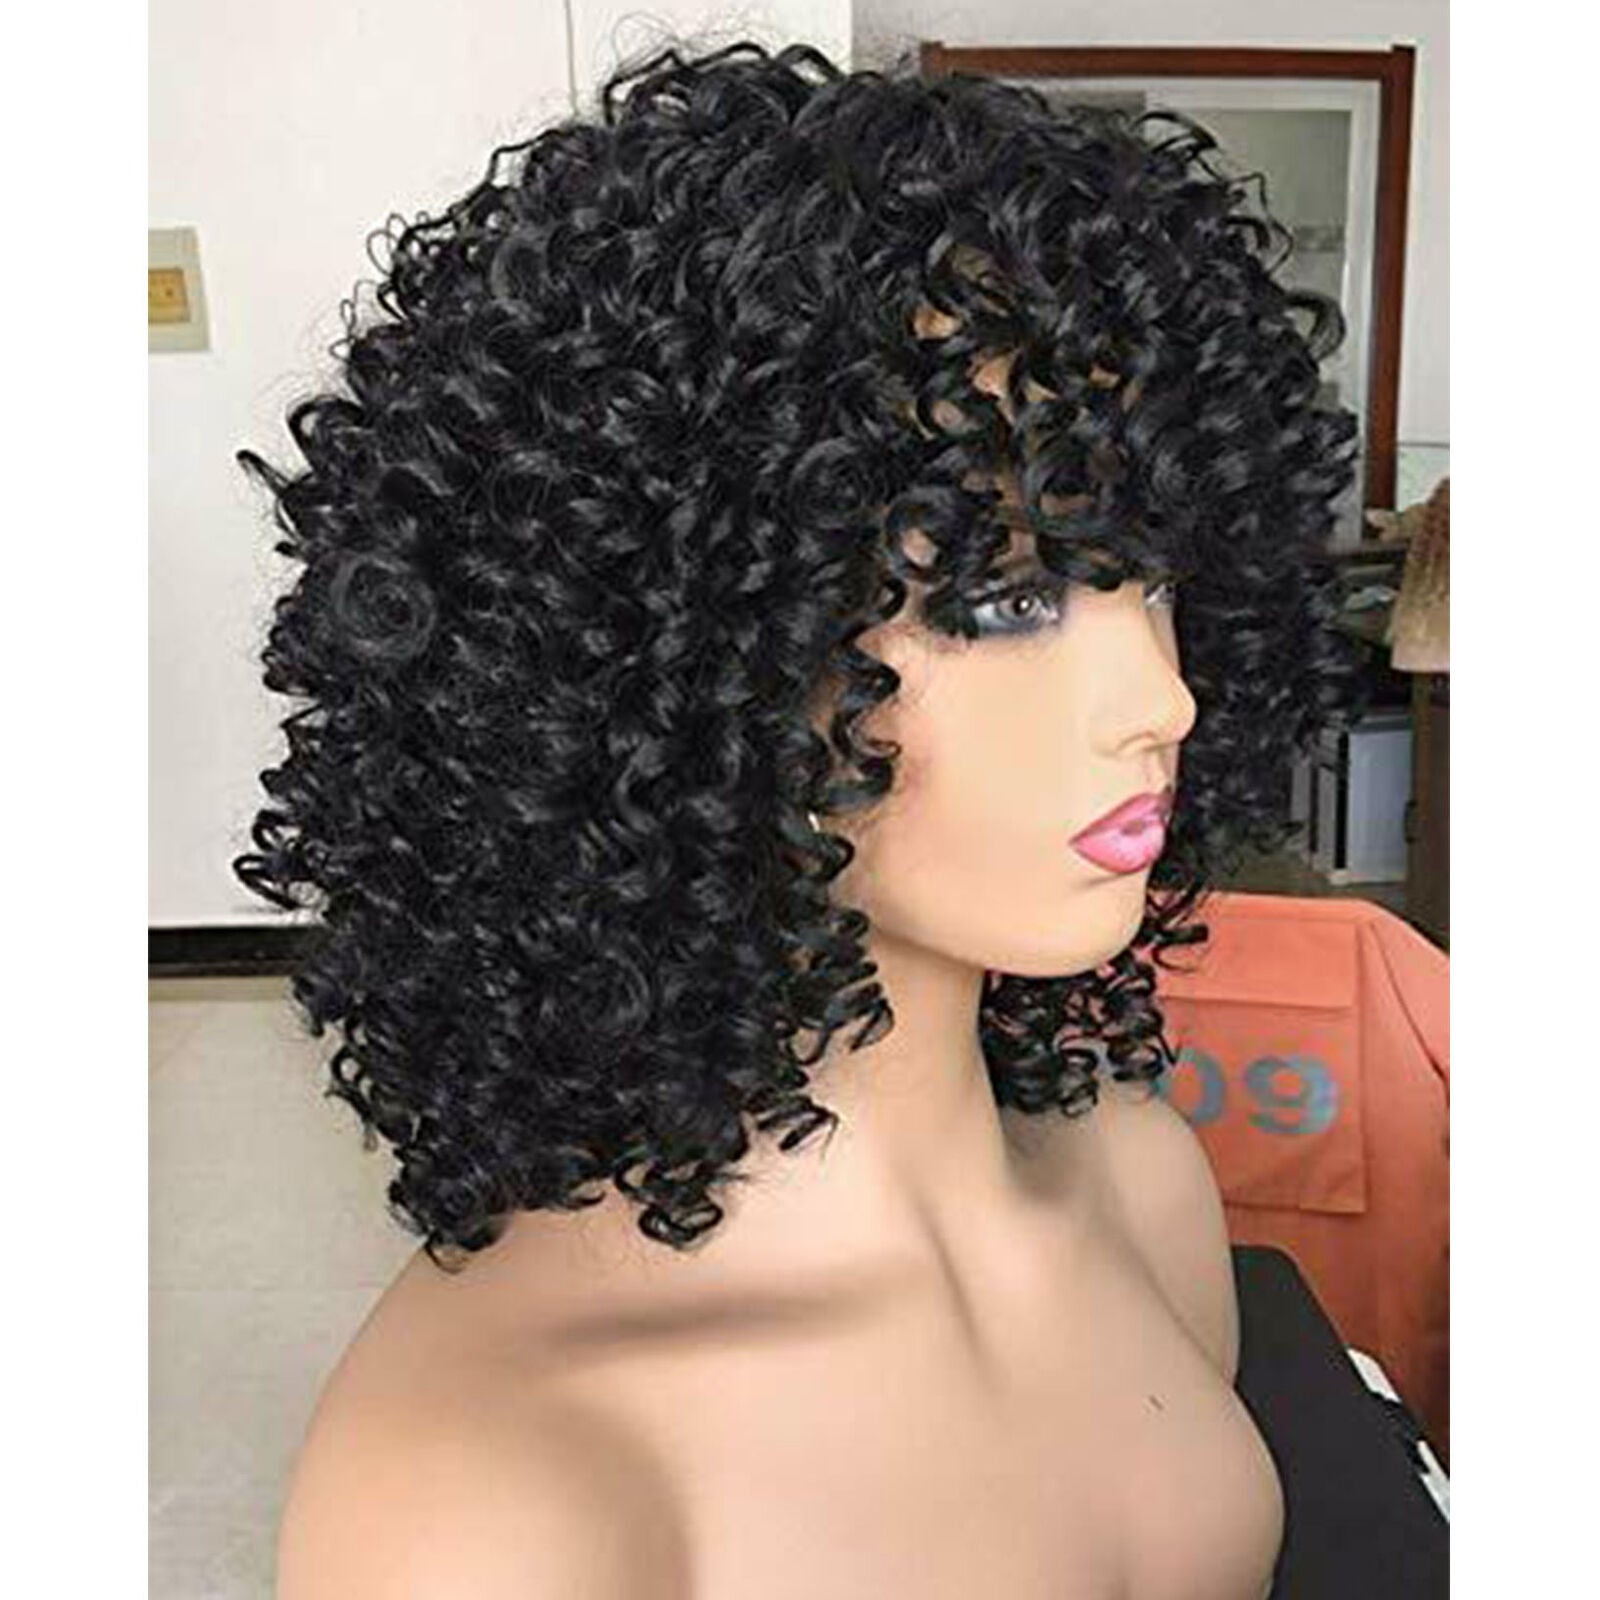 Women Curly Afro Wig with Bangs Short Kinky Curly Wigs for Black Women black